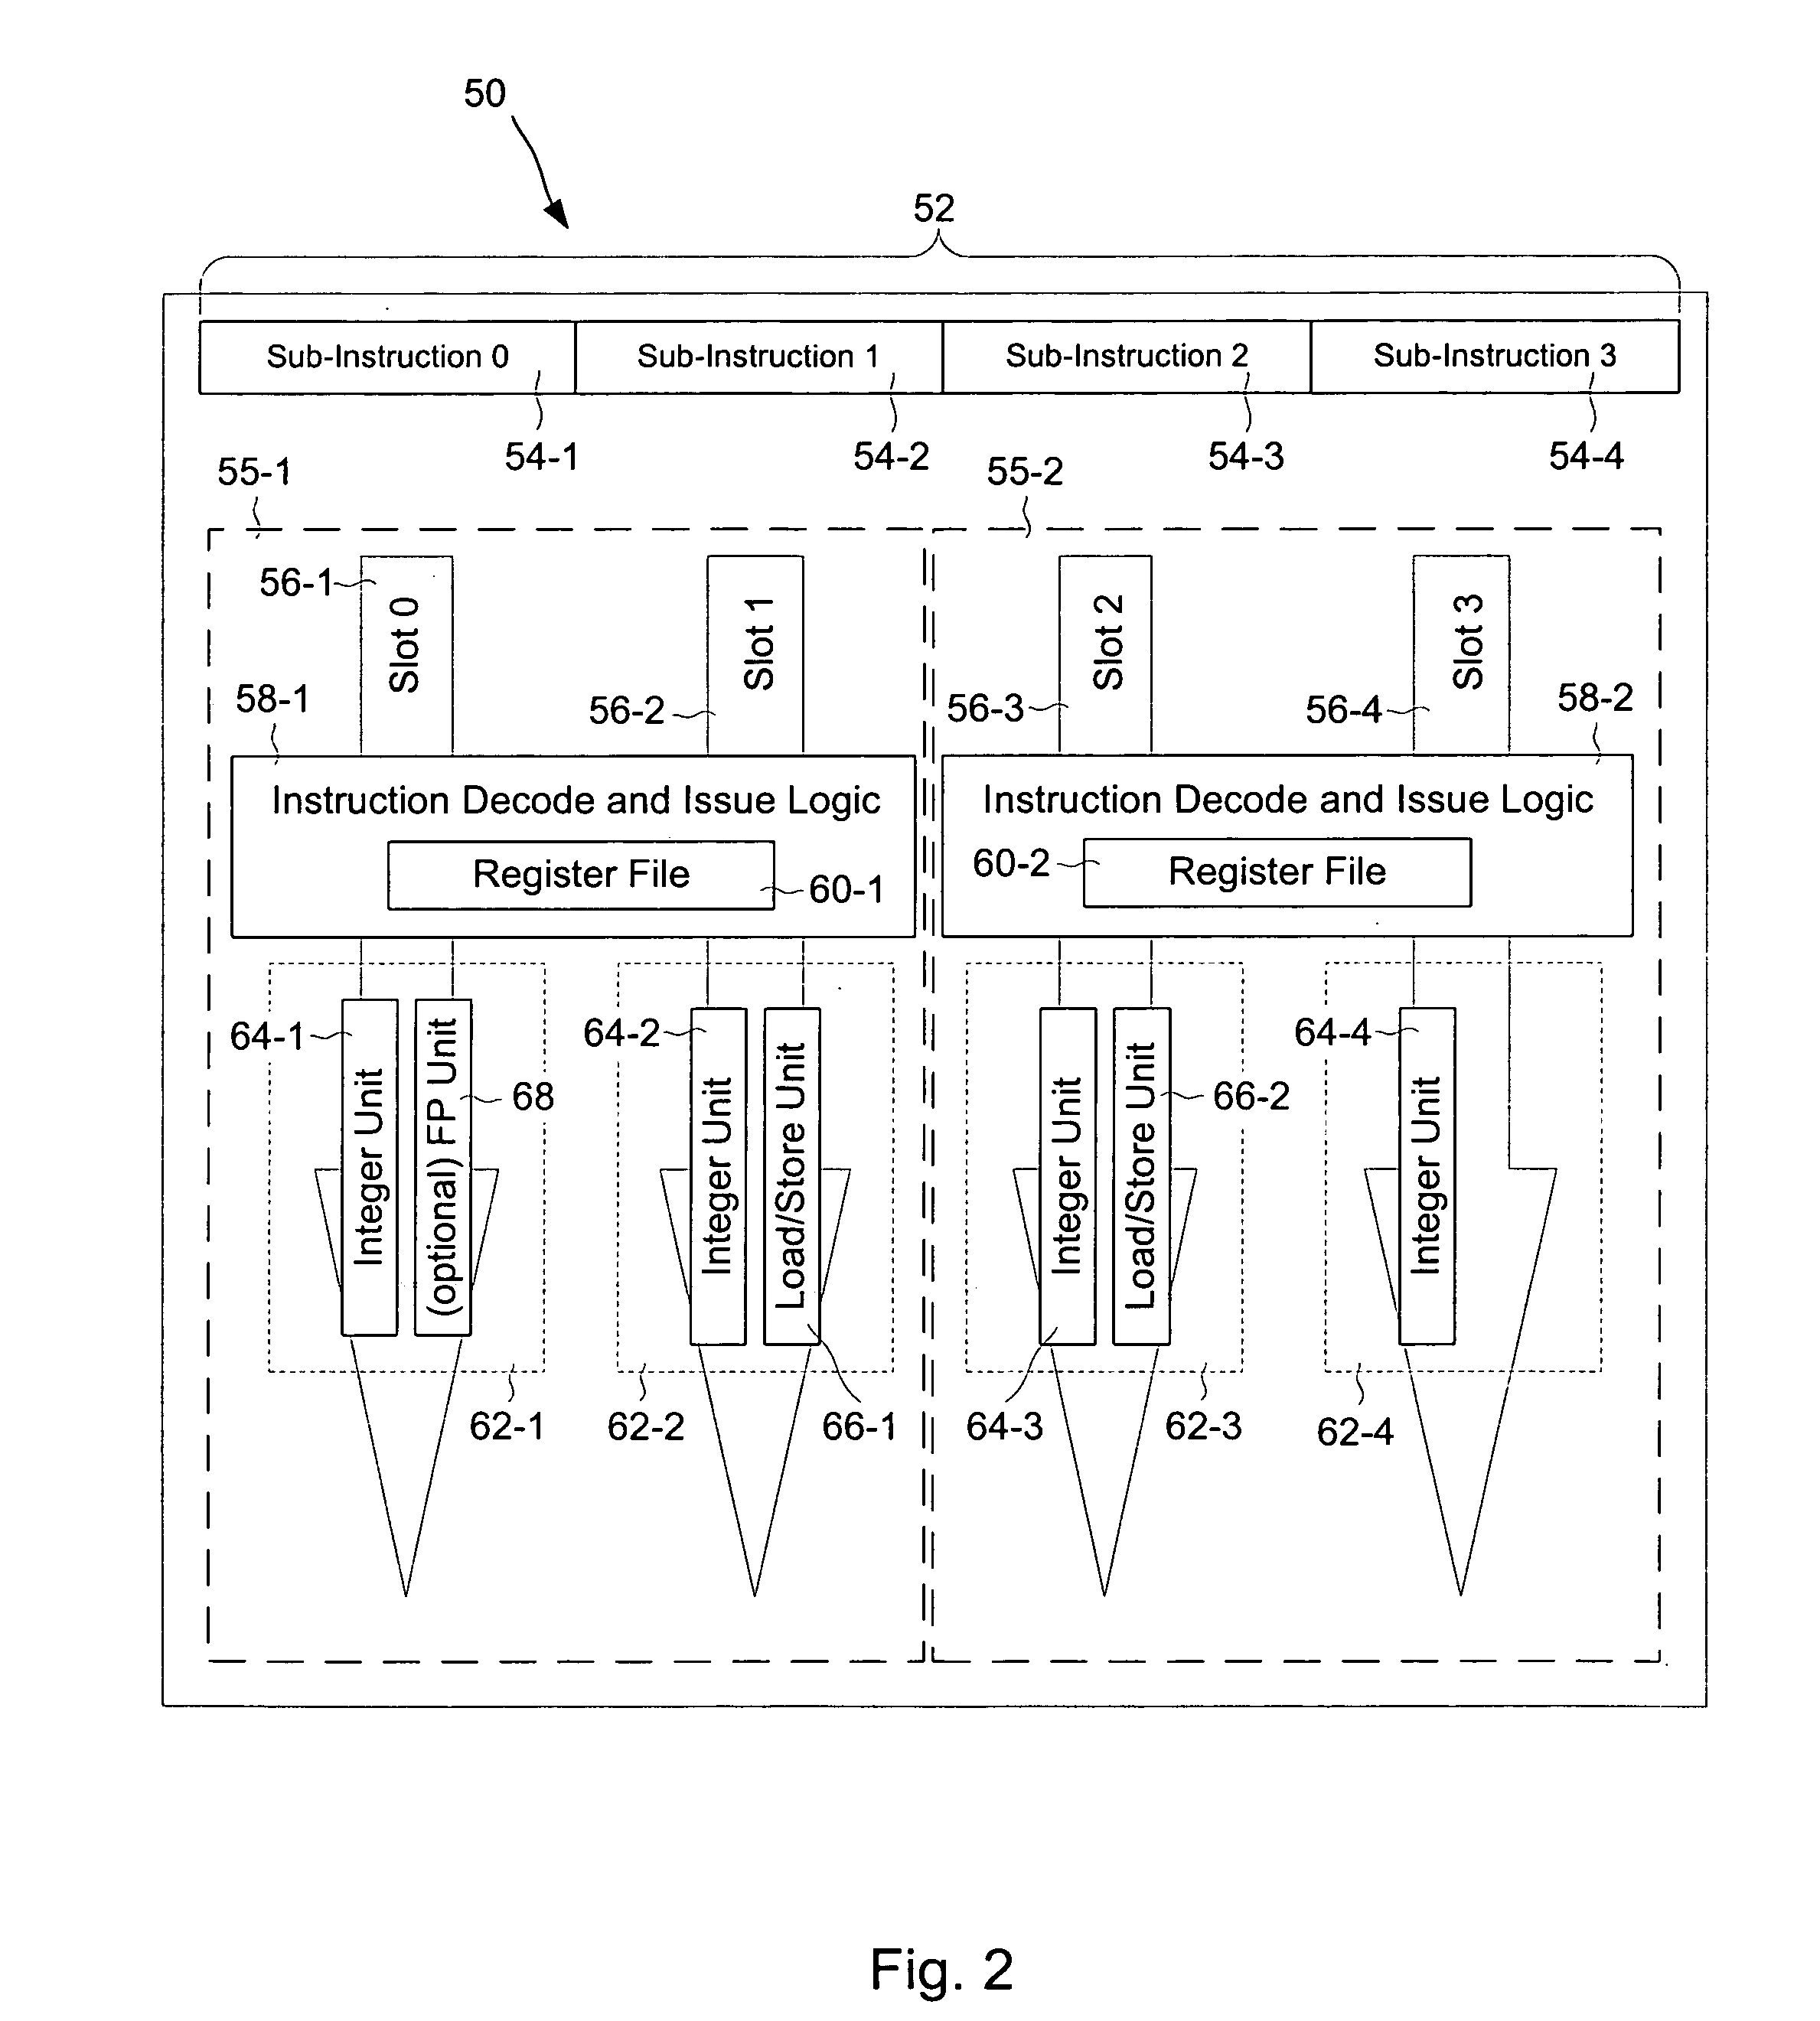 Computer processing architecture having a scalable number of processing paths and pipelines